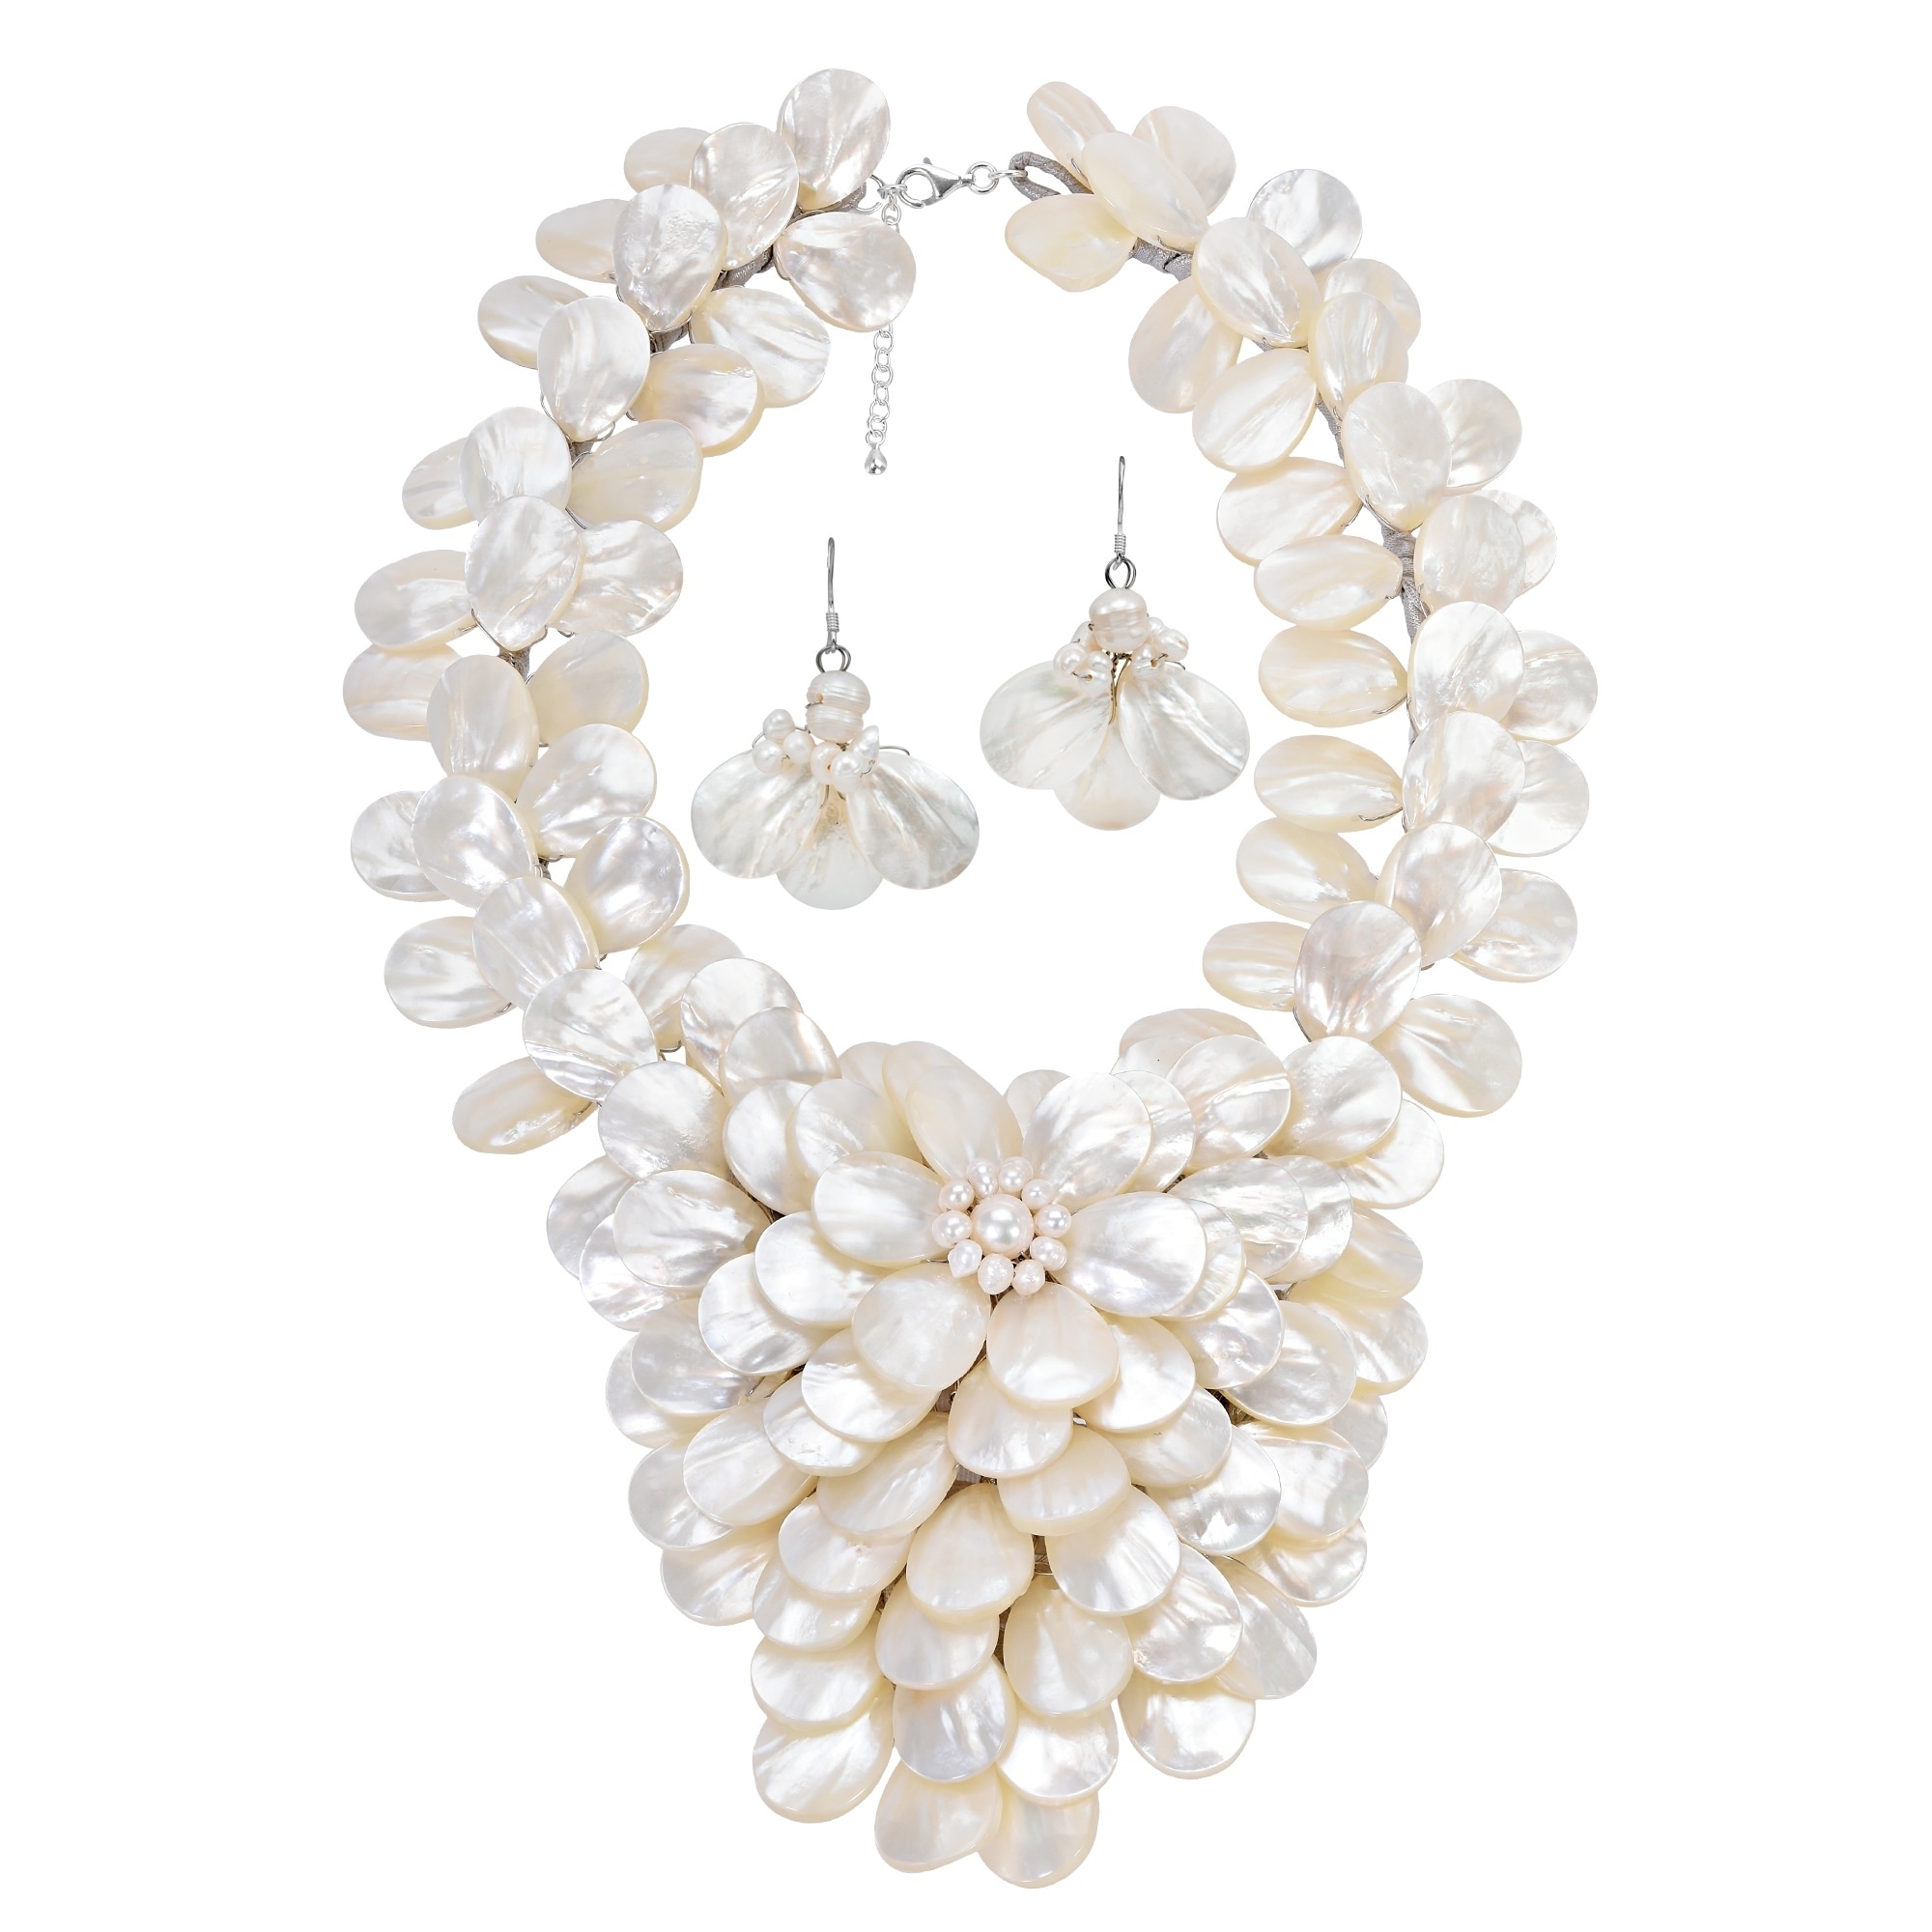 pearls necklace set jewellery